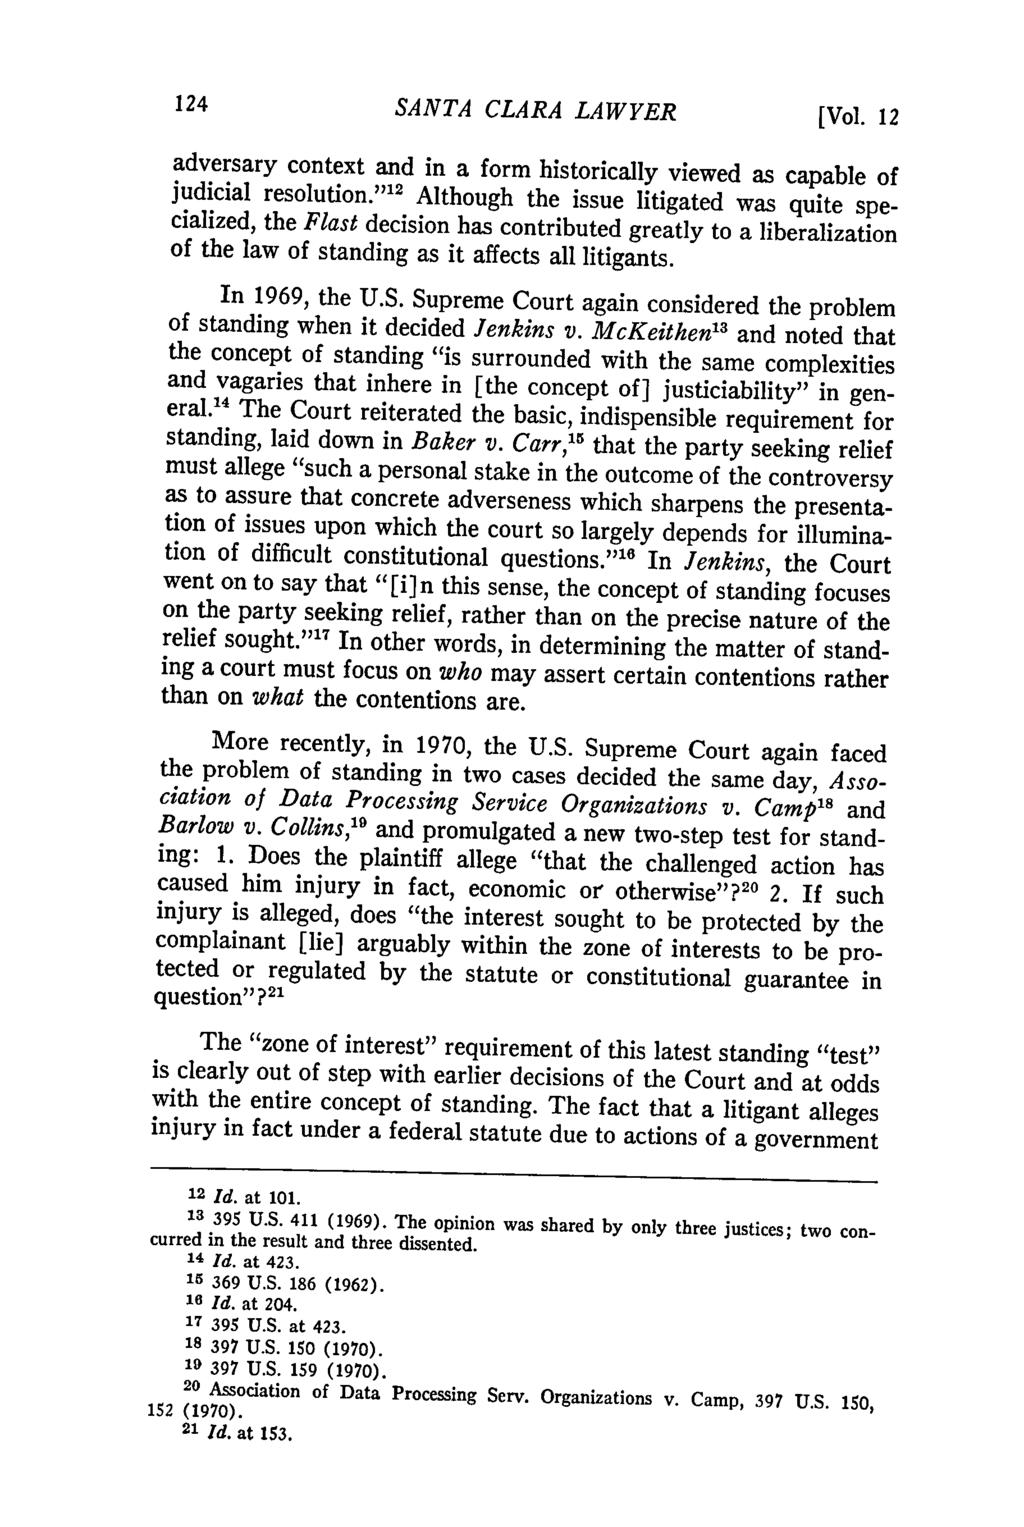 SANTA CLARA LAWYER [Vol. 12 adversary context and in a form historically viewed as capable of judicial resolution.